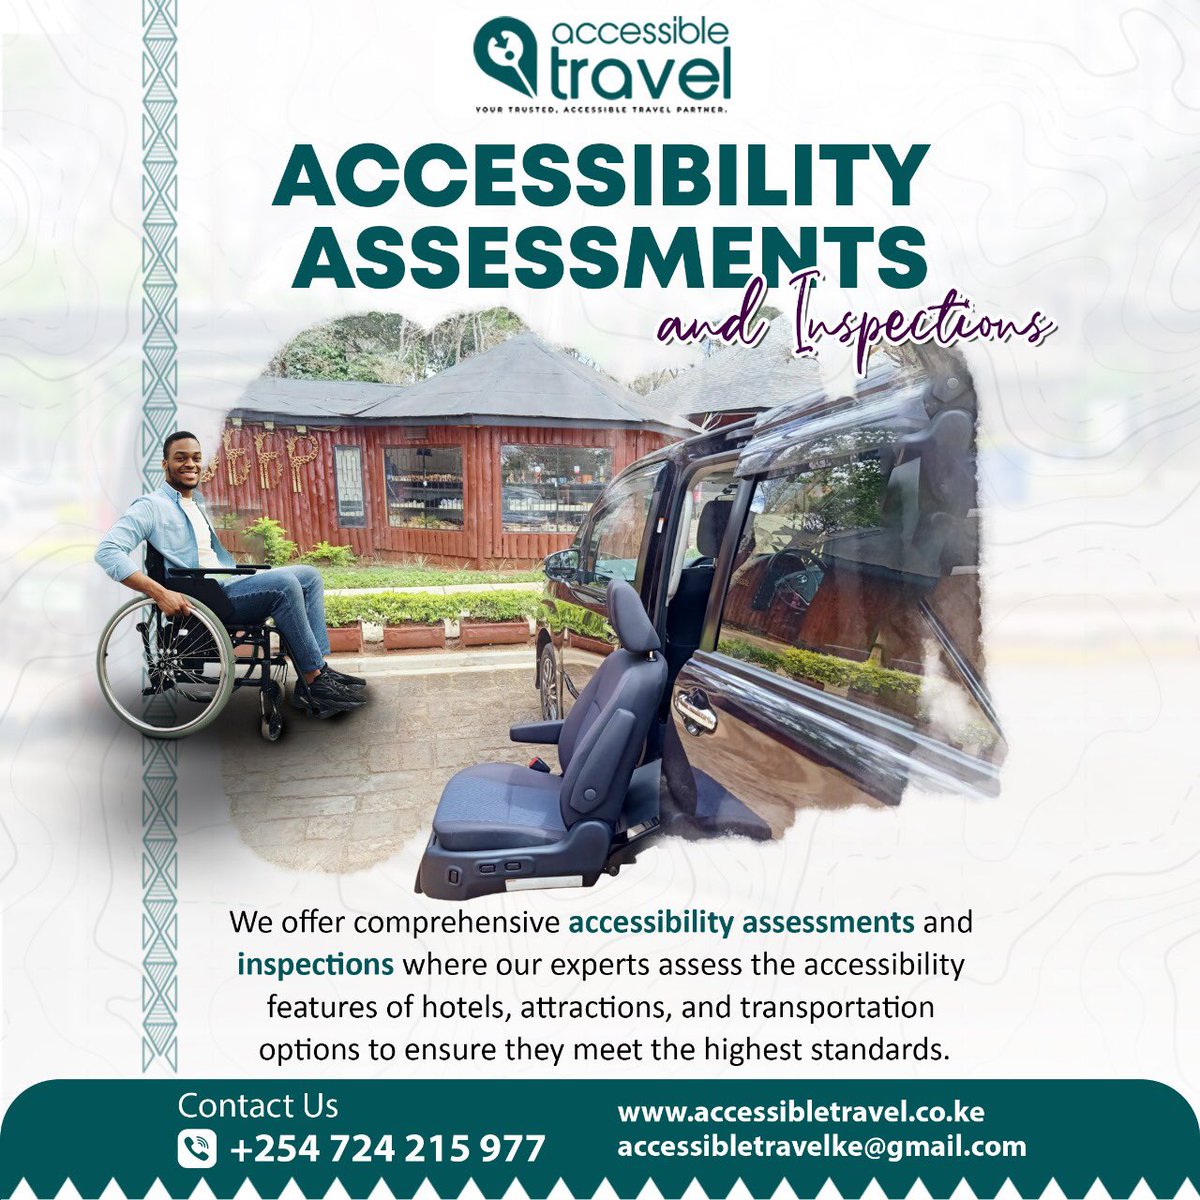 Facility Assessments: We offer consultation and assessment services for facilities to ensure they are accessible to clients with disabilities. We advocate for inclusive provisions in hospitality facilities to ensure inclusivity in accommodation settings for holiday destinations.